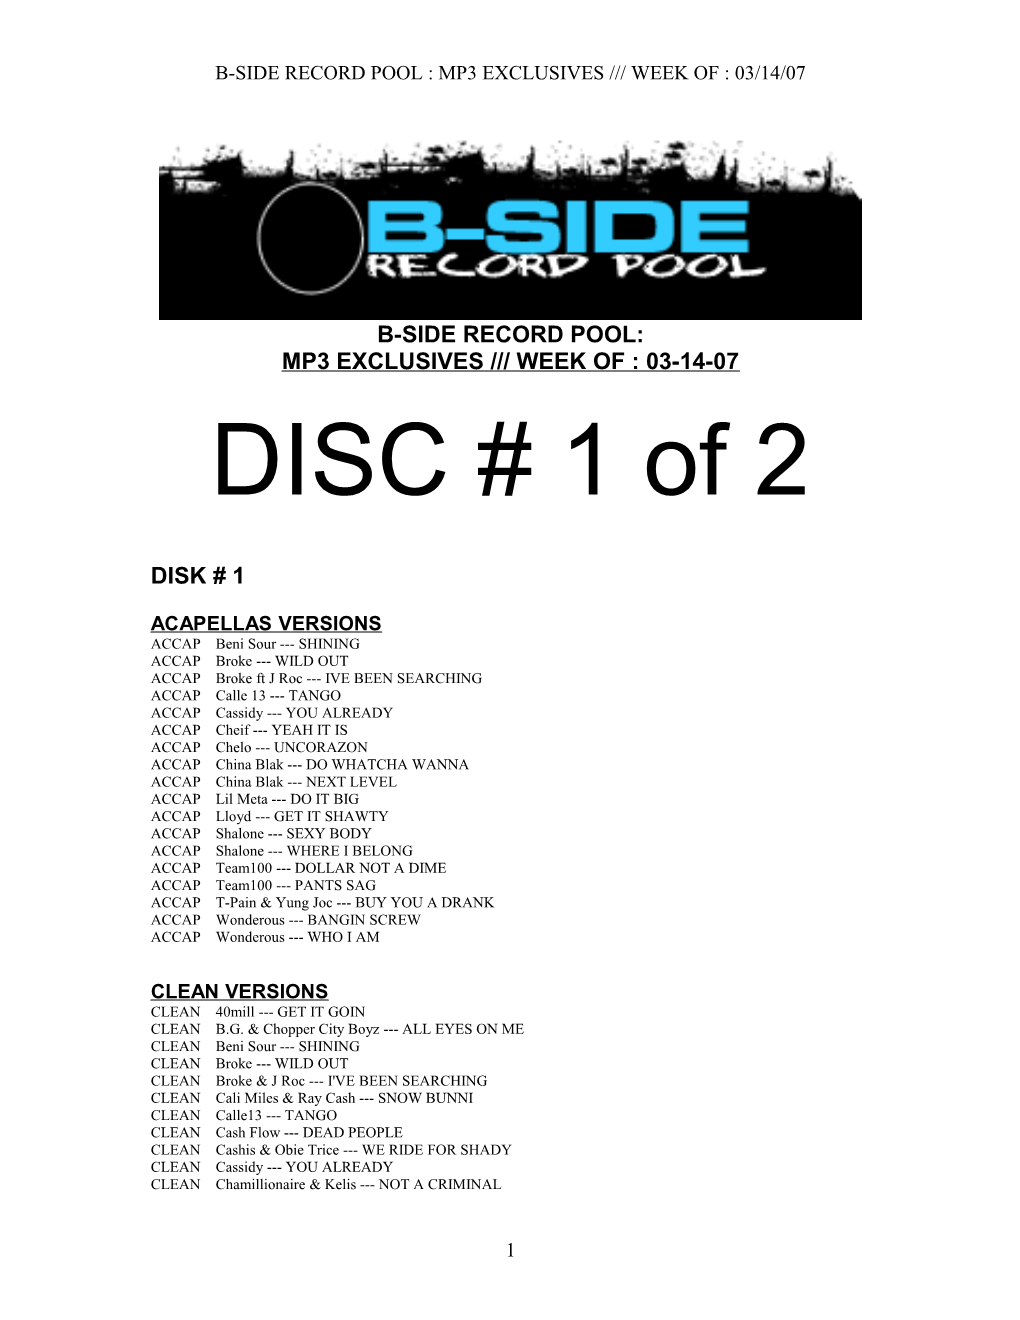 B-Side Record Pool : Mp3 Exclusives Week of : 03/14/07